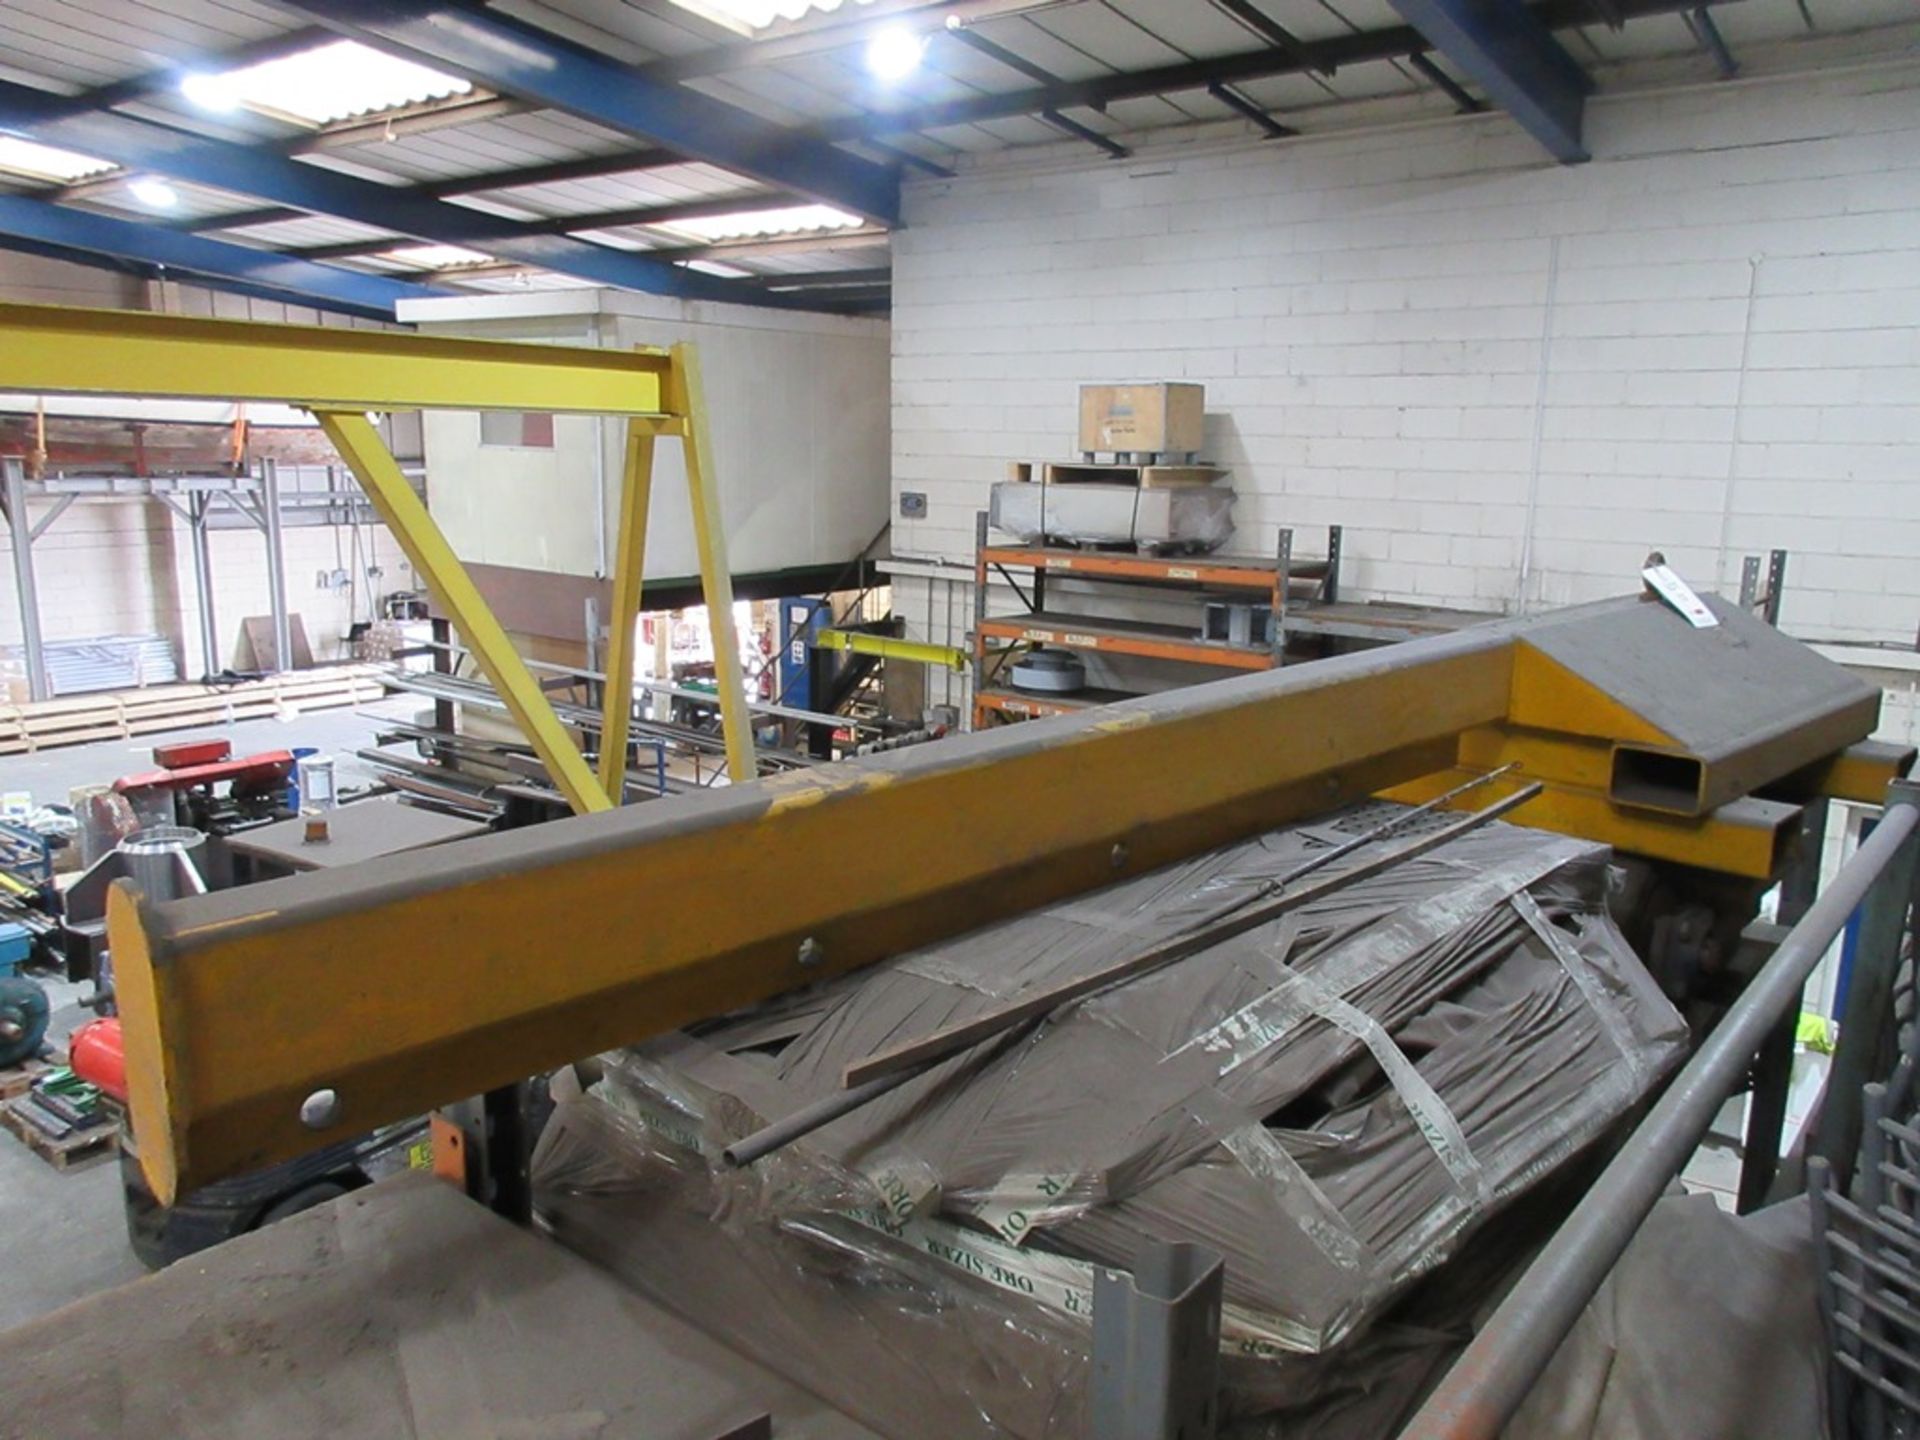 Steel framed forklift mounting lifting jib, approx. height 2.5m - Used Reserved until 12noon last